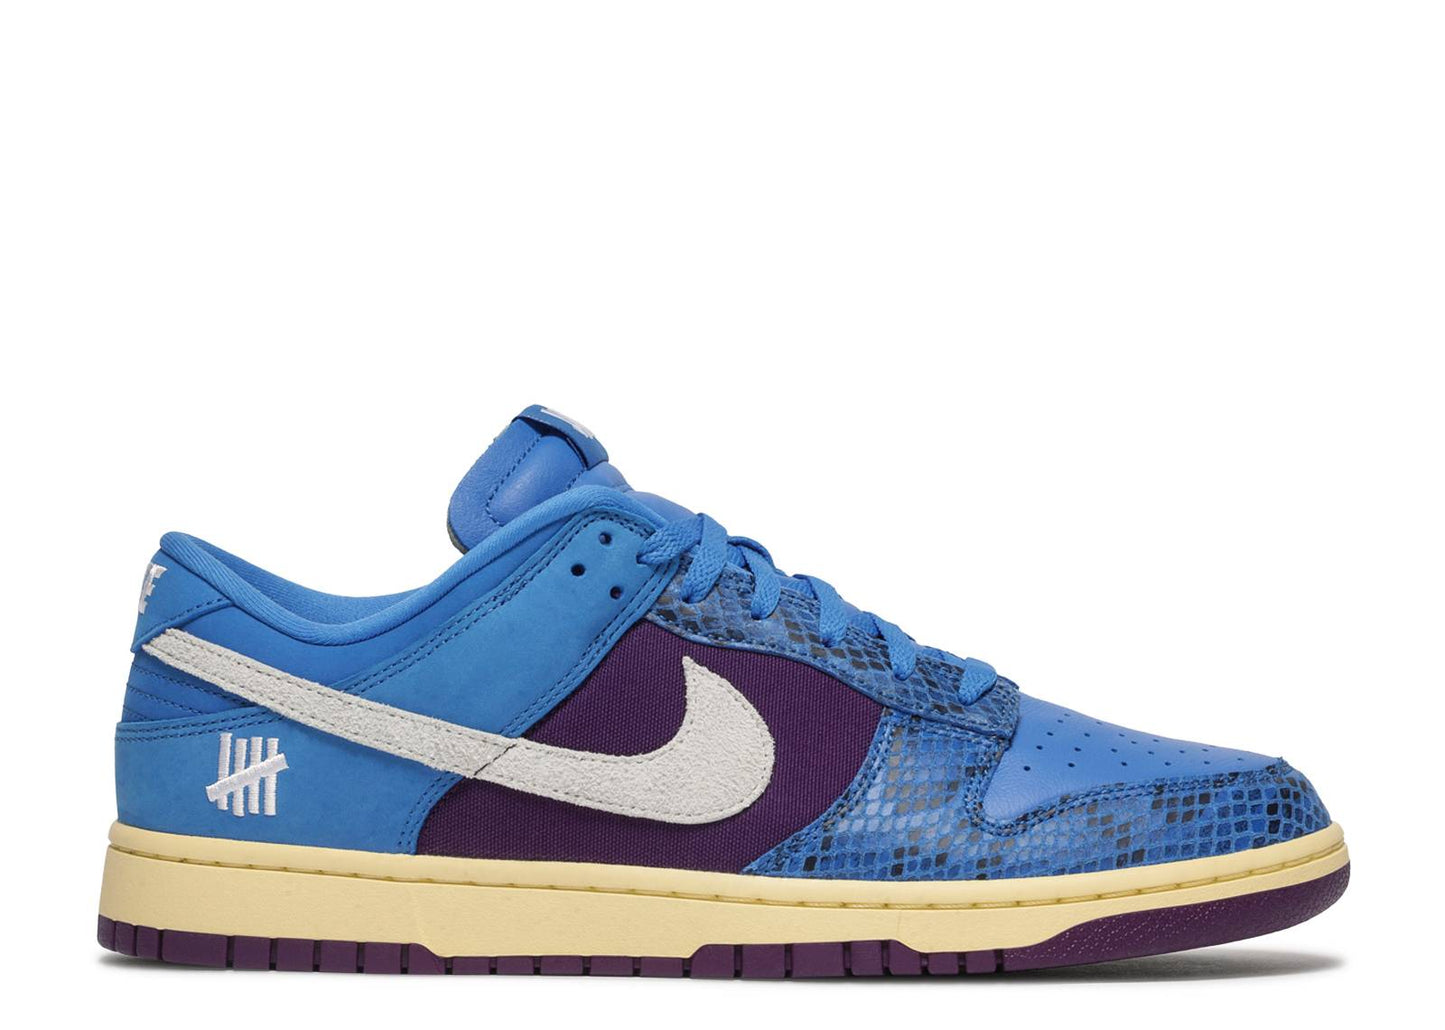 Undefeated x Nike Dunk Low SP "5 On It Royal"